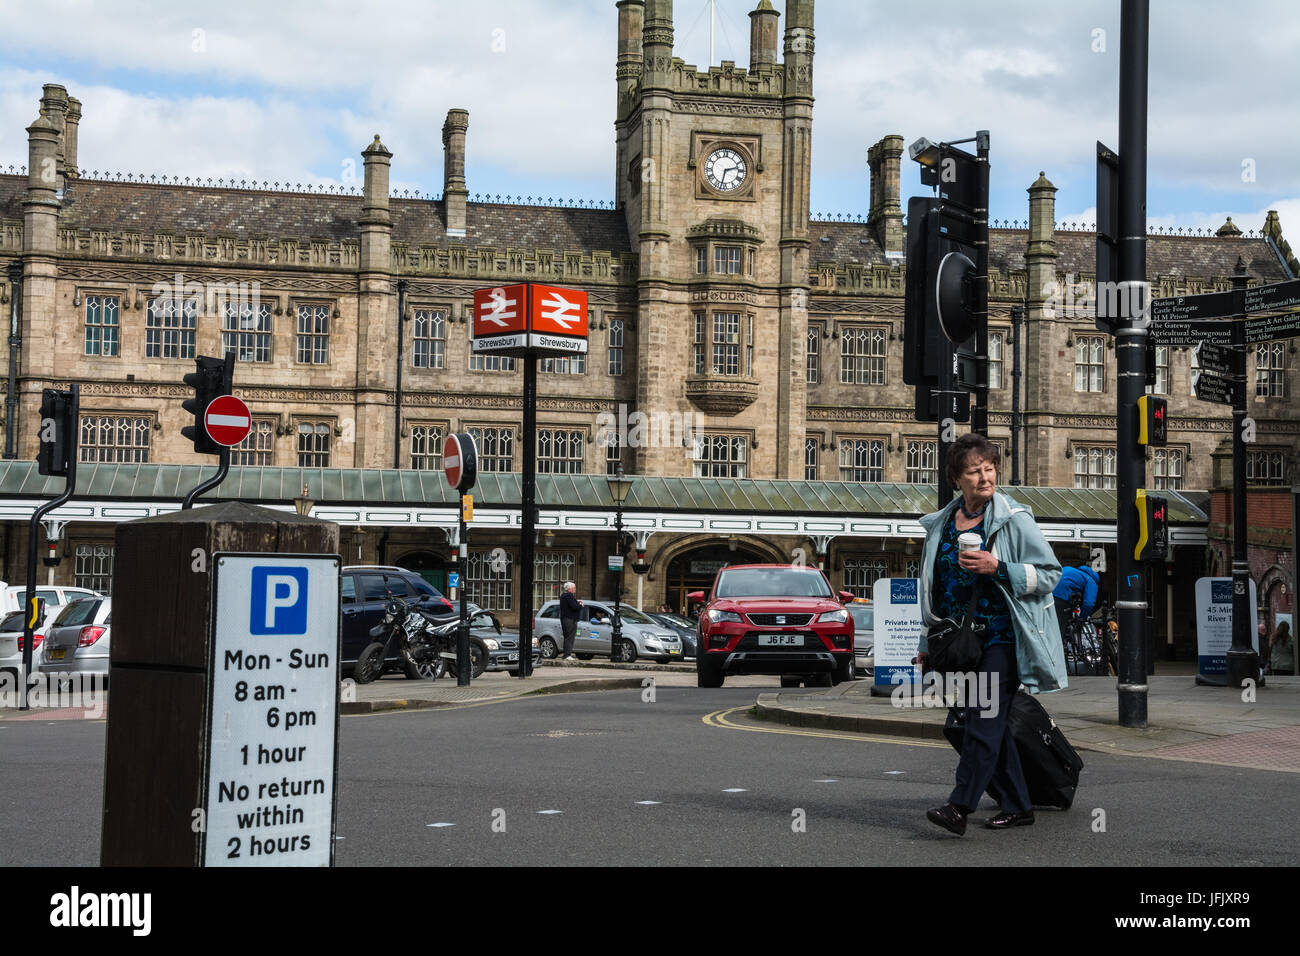 Shrewsbury train station in the background. Commuter holding a cup of coffee, pulling a suitcase, crossing the A5191 road in the foreground. UK. Stock Photo